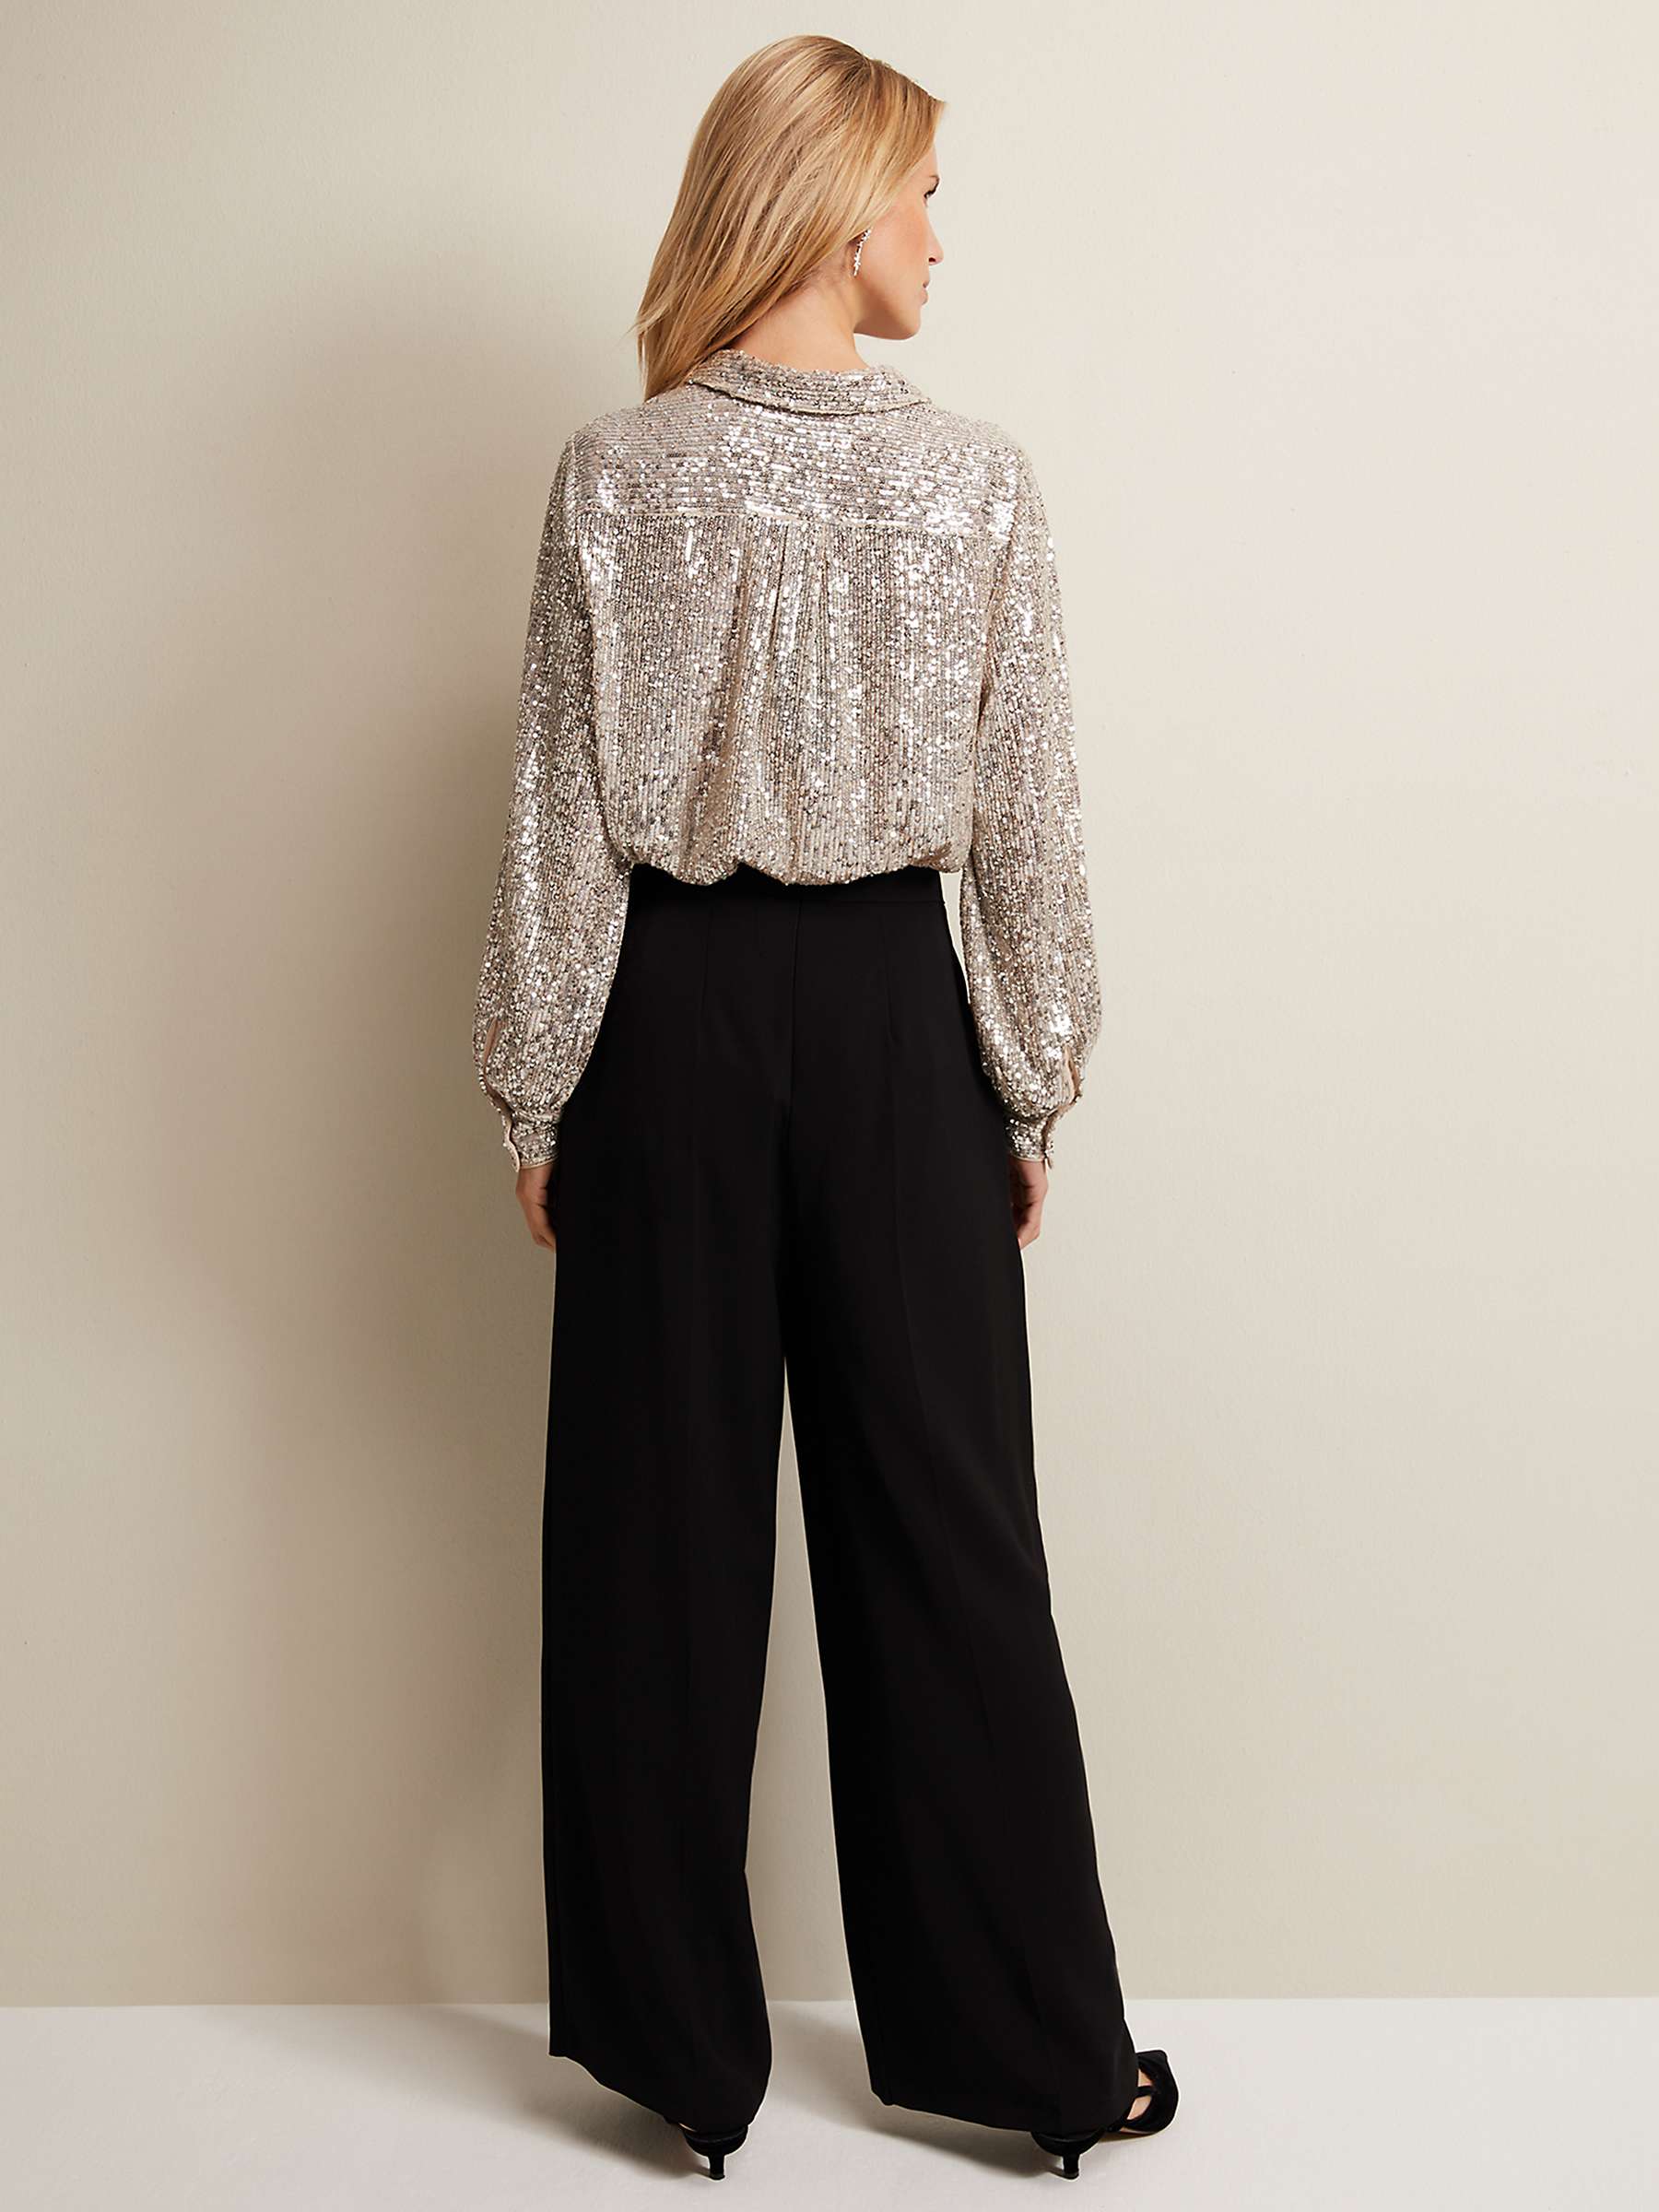 Buy Phase Eight Florentine Wide Leg Trousers Online at johnlewis.com